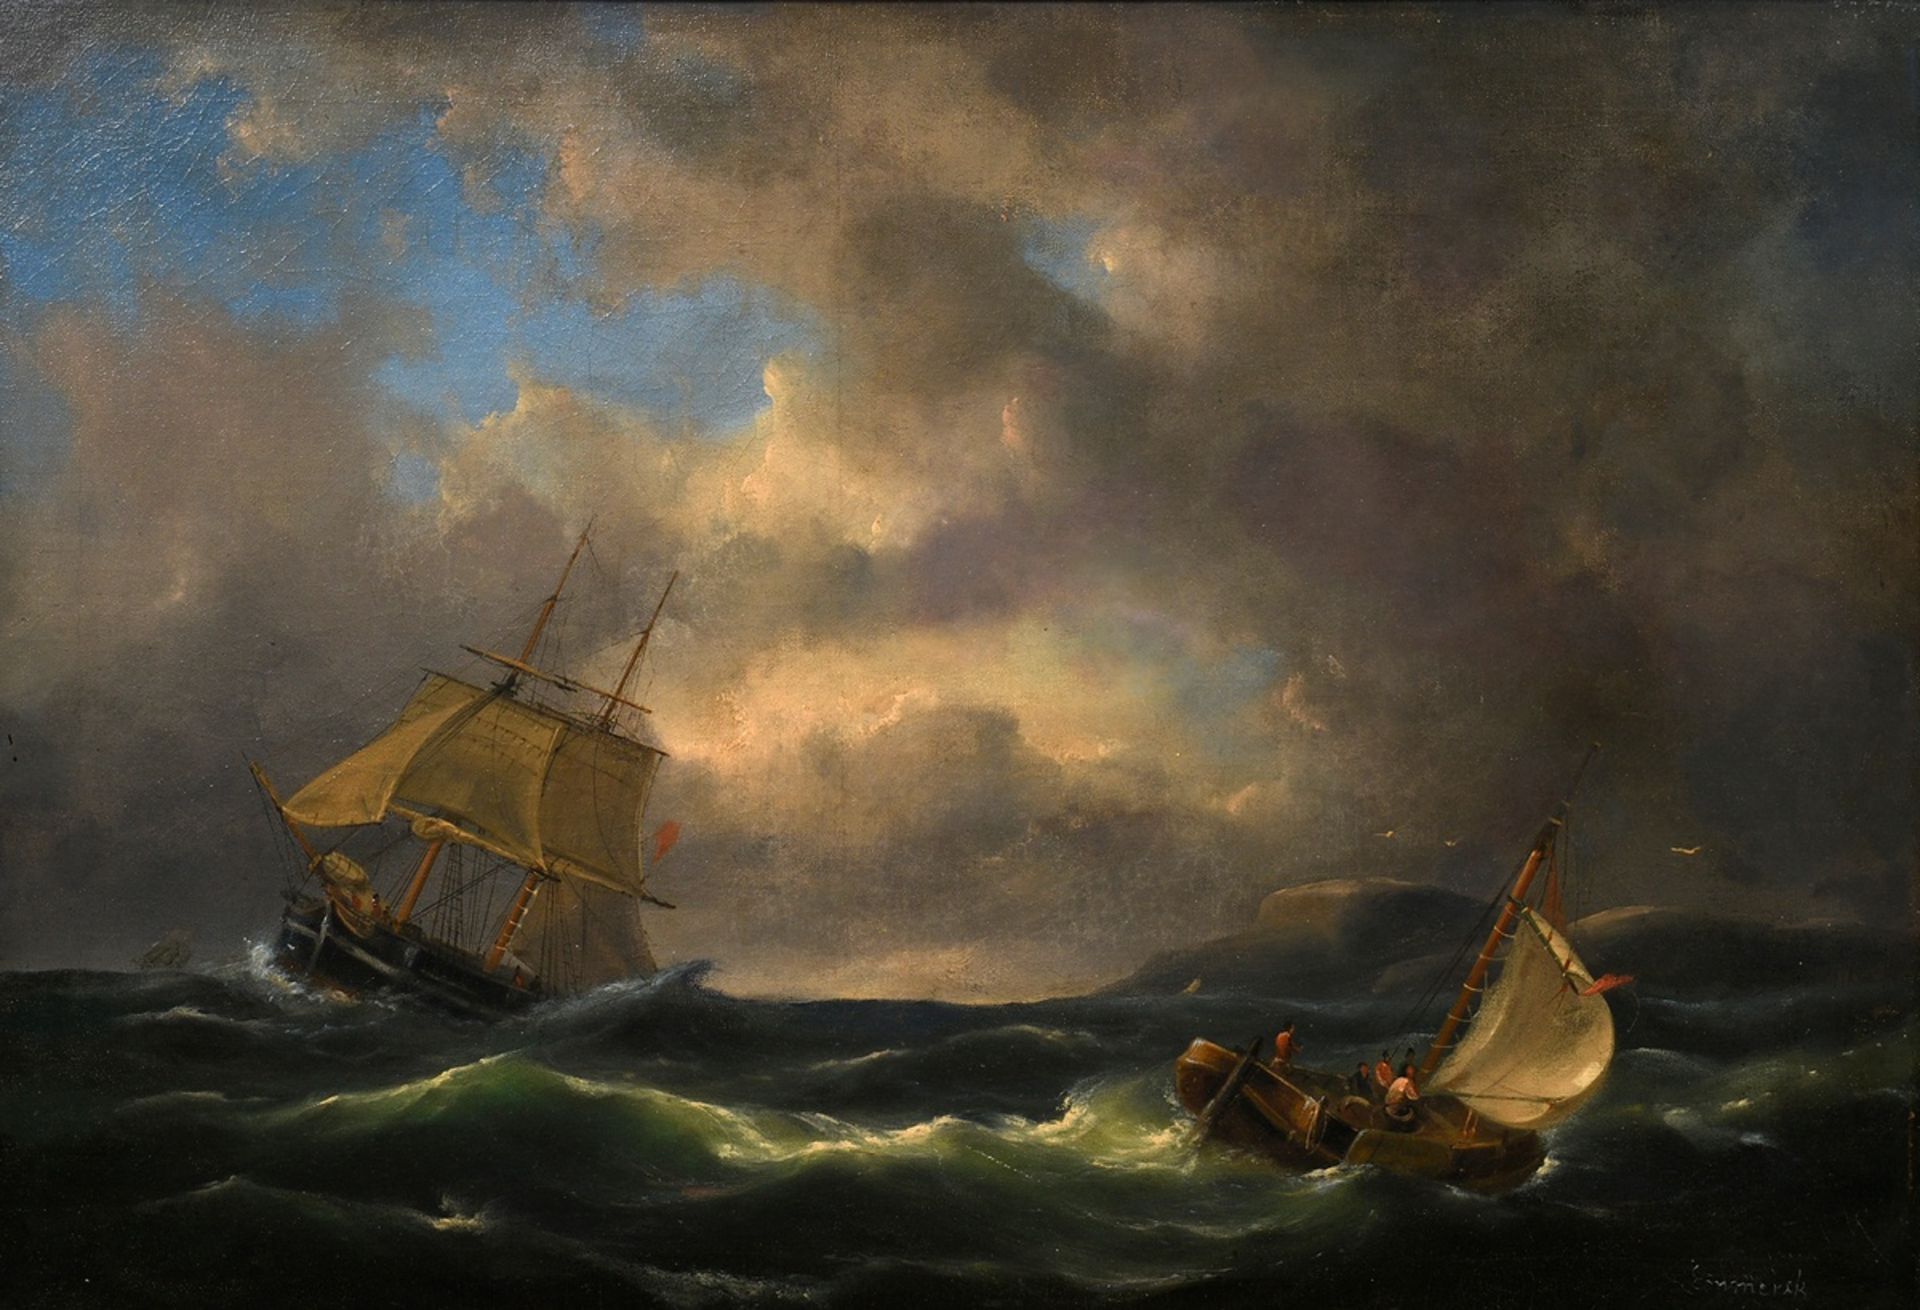 Emmerik, Govert van (1808-1882) "Ships in stormy sea", oil/canvas probably doubled, lower right sig